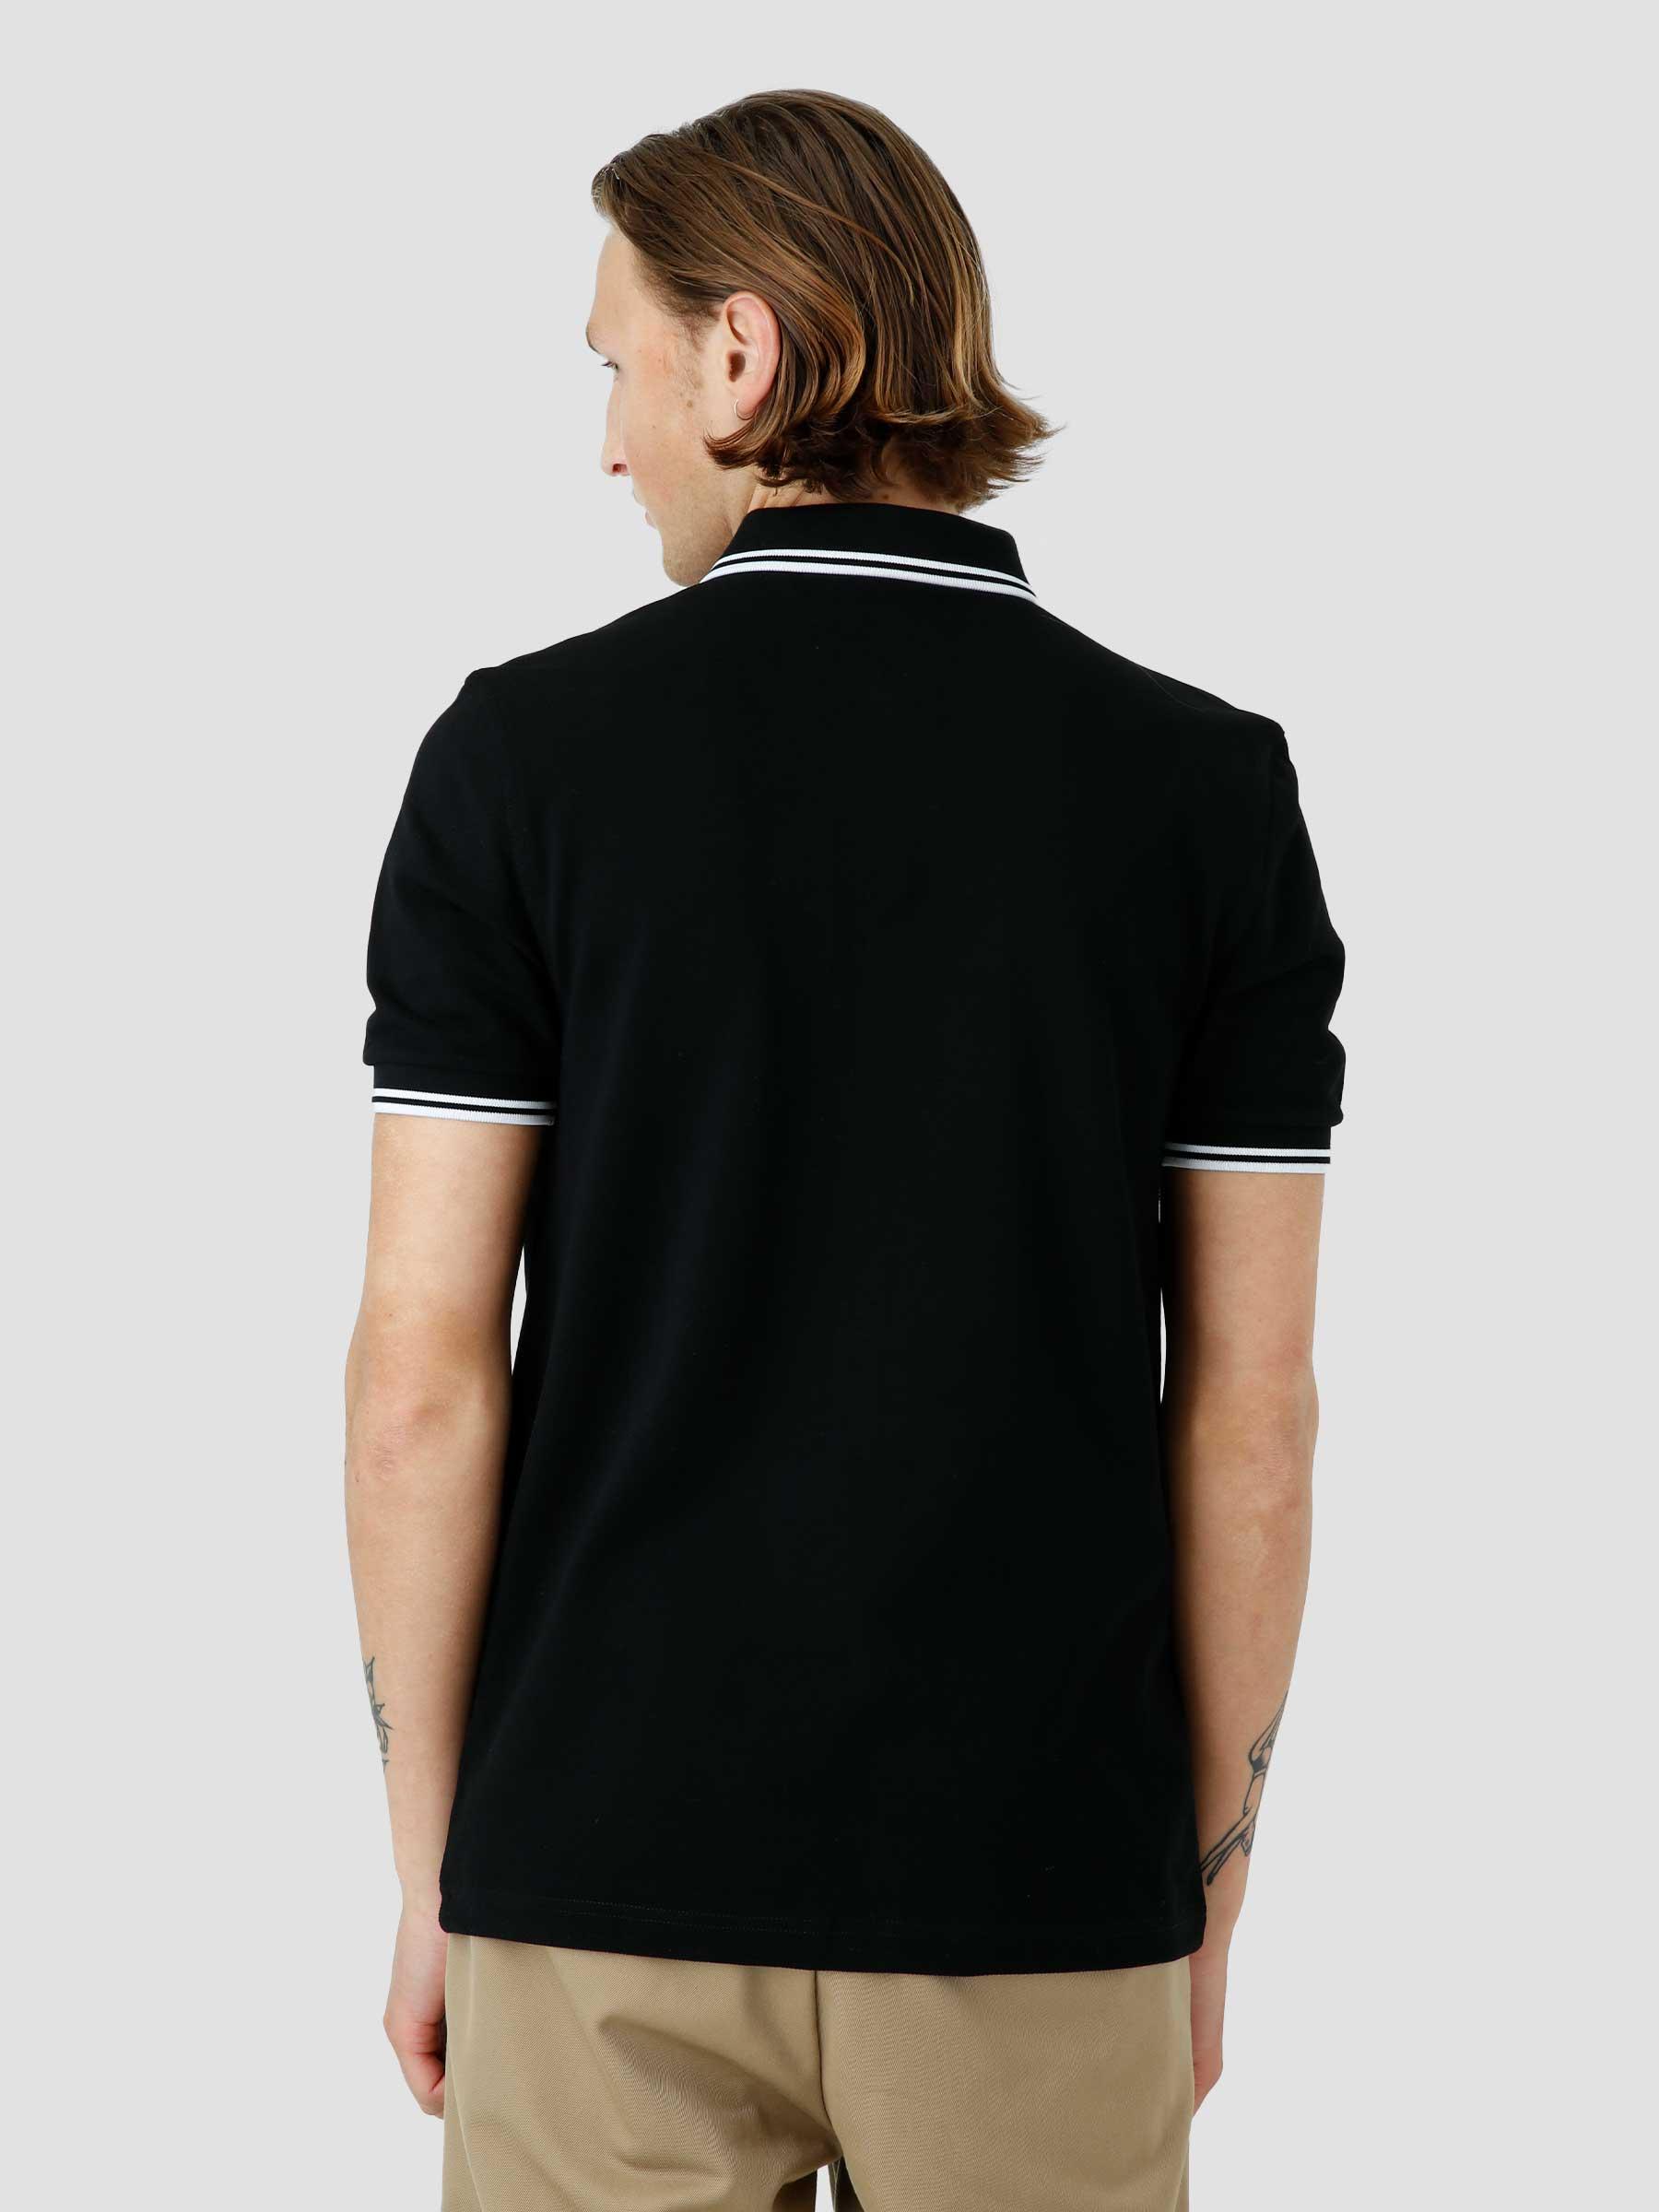 Twin Tipped Fred Perry Shirt Black M3600-350